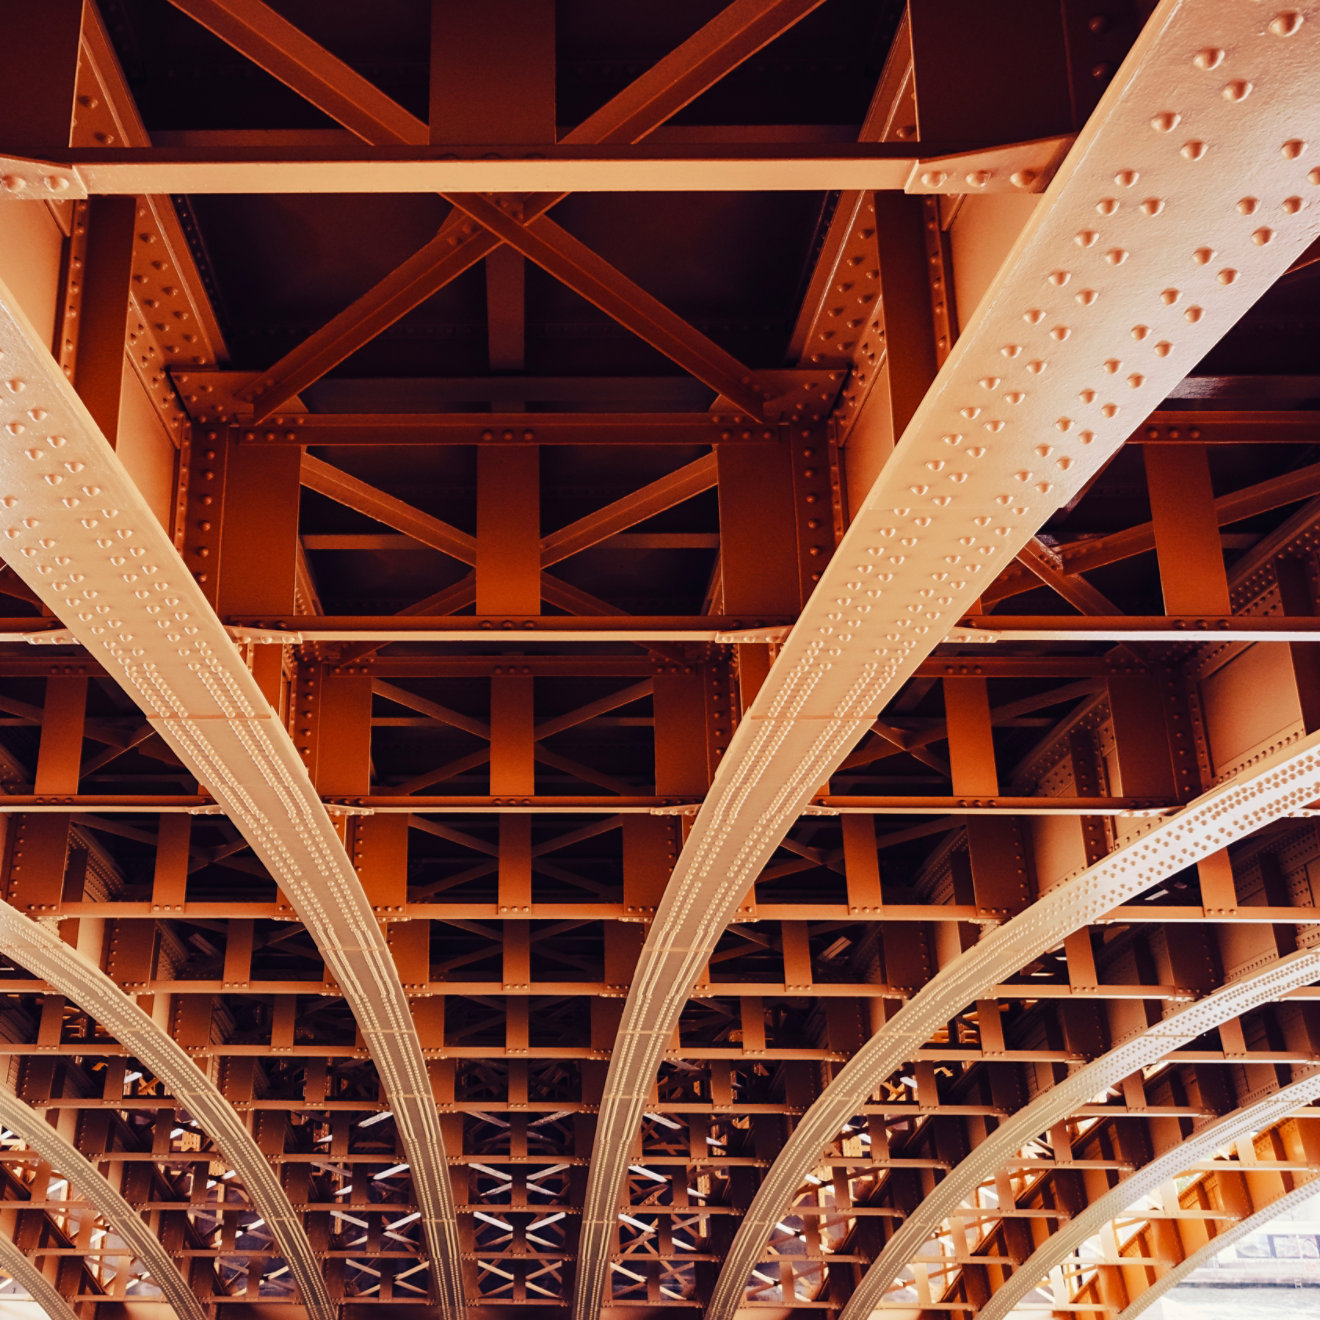 Bridge construction Metal sheet structure pattern Architecture details; Shutterstock ID 1354698008; purchase_order: -; job: -; client: -; other: -